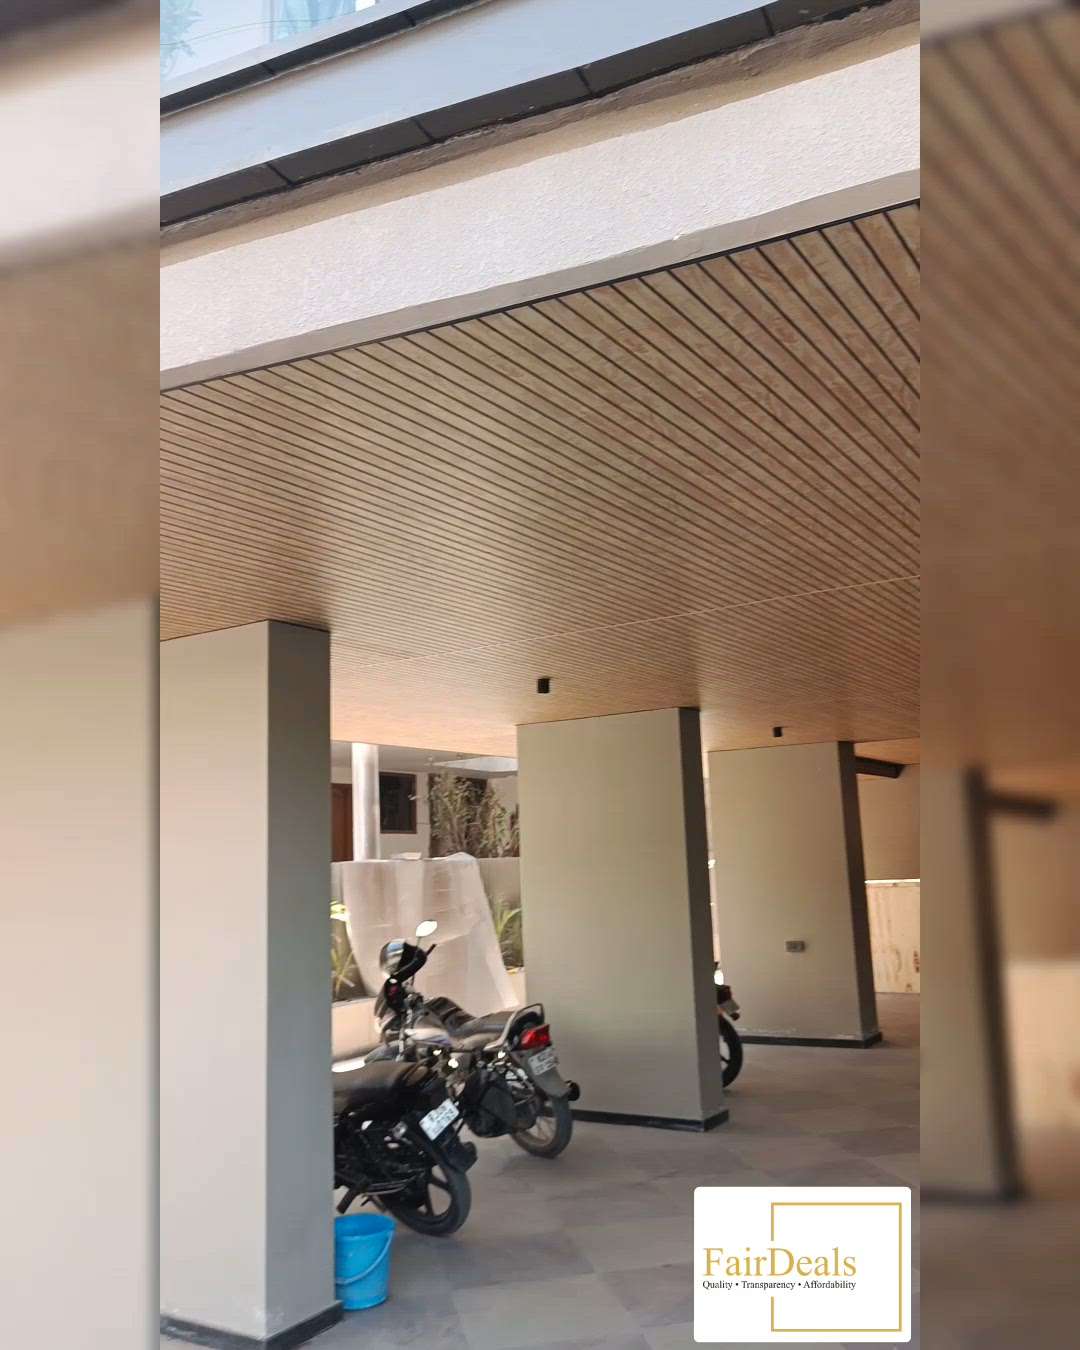 PVC Louvers Installed By FairDeals Jaipur.

Contact Us - 8107940665
                       7878443883
#fairdealsjaipur #fairdeals #jaipur #jaipurdiaries #HomeDecor #HouseDesigns #HomeAutomation #ElevationHome #ElevationDesign #InteriorDesigner #Architectural&Interior #interiordecoration #interiordecorators #interiorcontractors #Architect #architecturedesigns #LivingroomDesigns #business #sale #advertising #PVCFalseCeiling #Pvc #pvcwallpanel #pvcpanelinstallation #pvclouver #pvclouvers #wpclouvers #louvers #louverpanel #jaipuri #jaipurcity #jaipurblogger #jaipurshopping #jodhpur #jodhpurarchitect #udaipur #HouseConstruction #Contractor #CivilEngineer #CivilContractor #marketing #jaisalmer #sikar #sikararchitect #alwar #alwararchitect #rajasthan #rajasthandiaries #rajasthaniiteriordesign #pinkcity #pinkcityjaipur